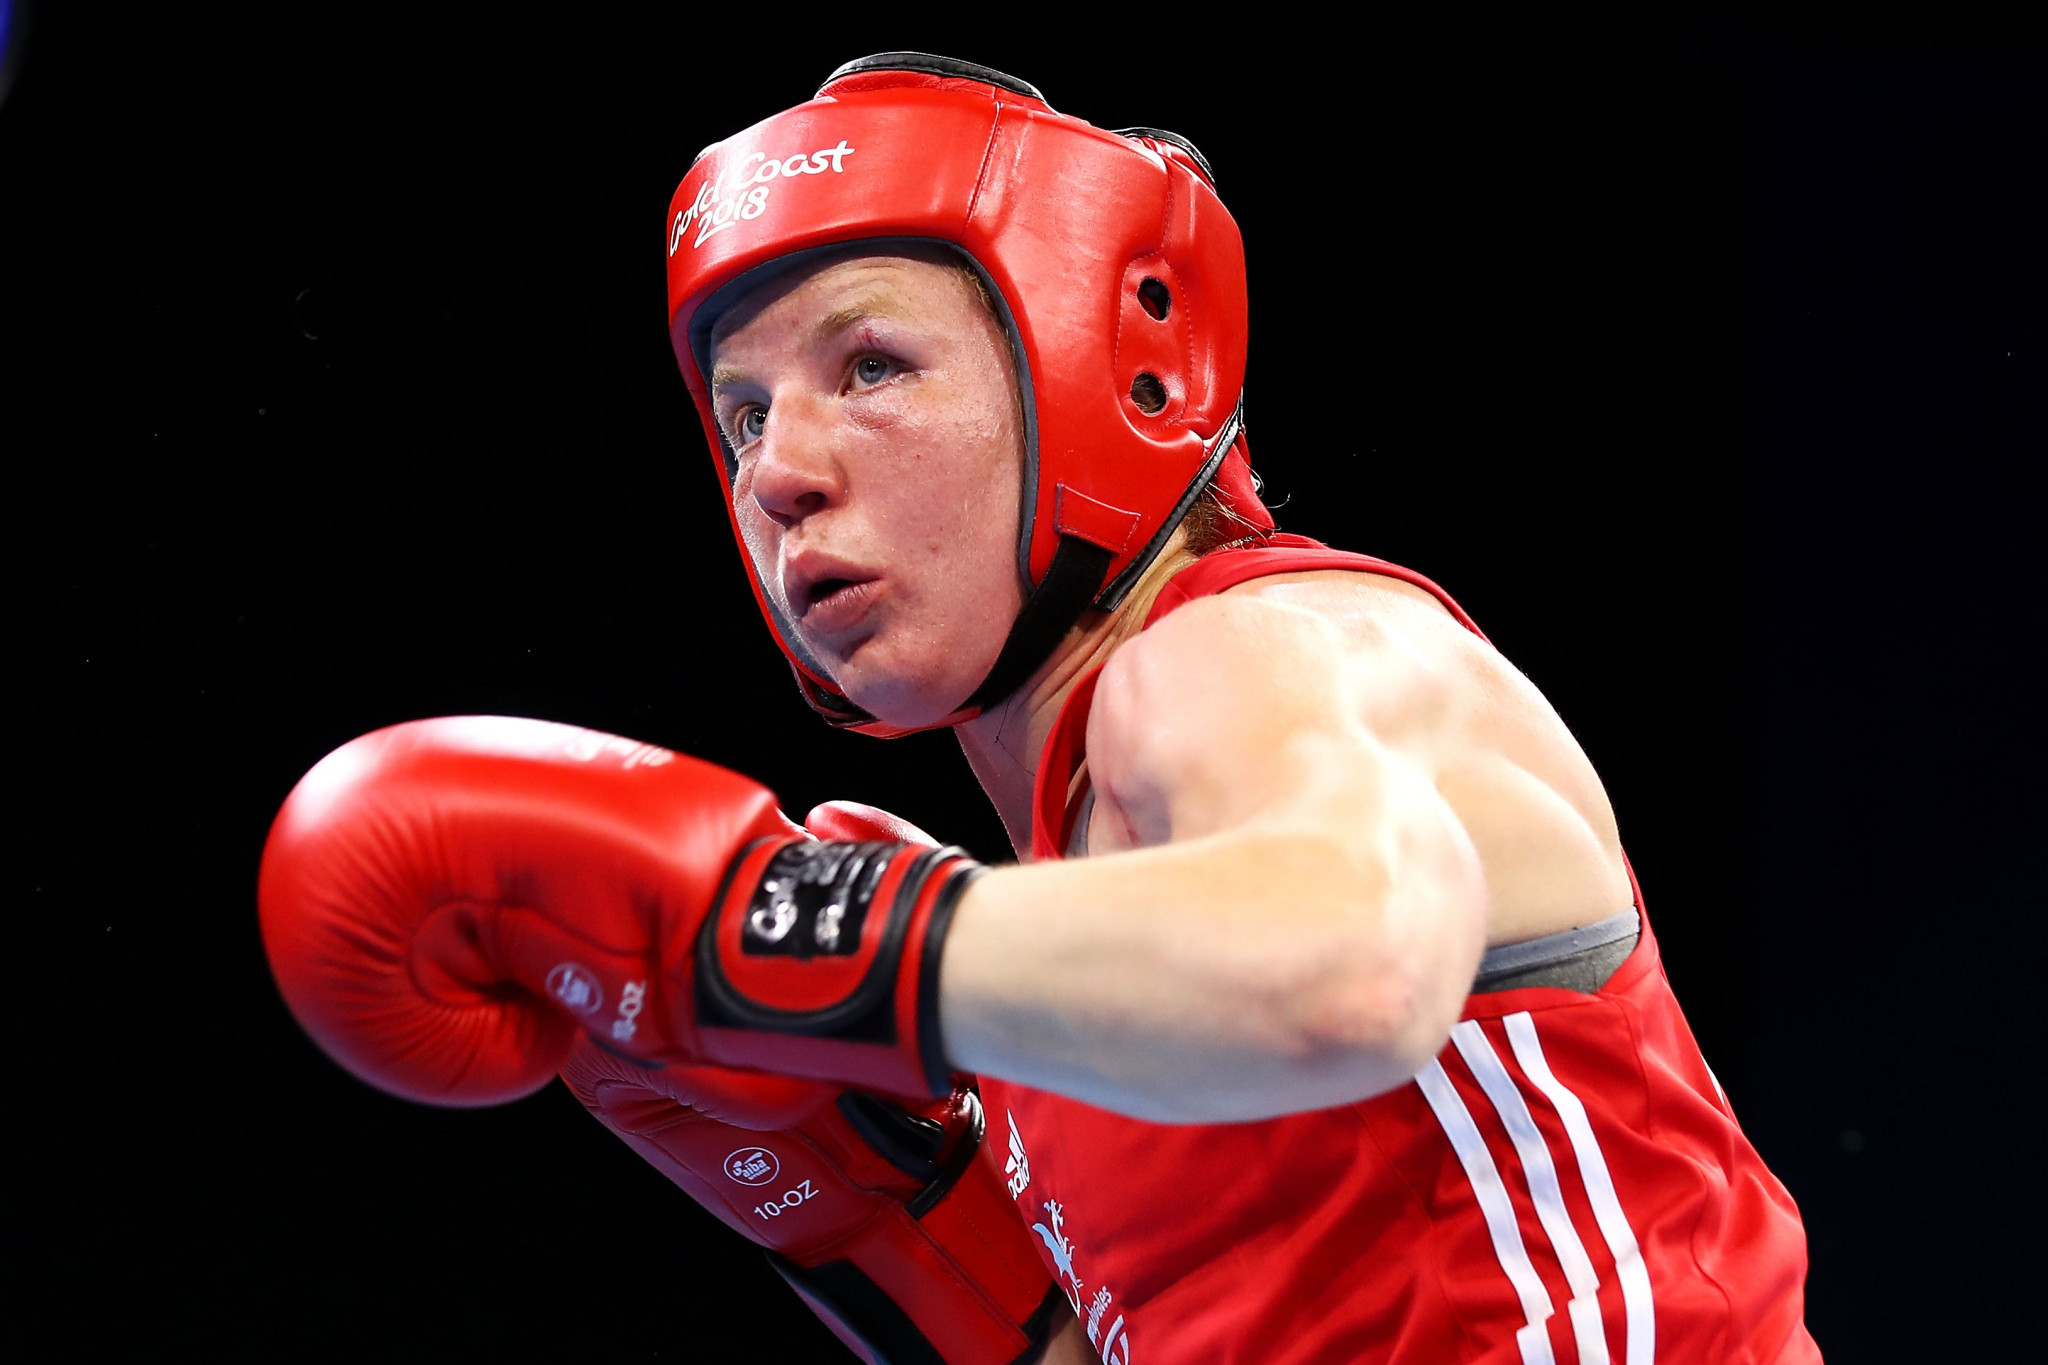 Rosie Eccles of Wales crashed out of the AIBA Women's World Championships ©Getty Images